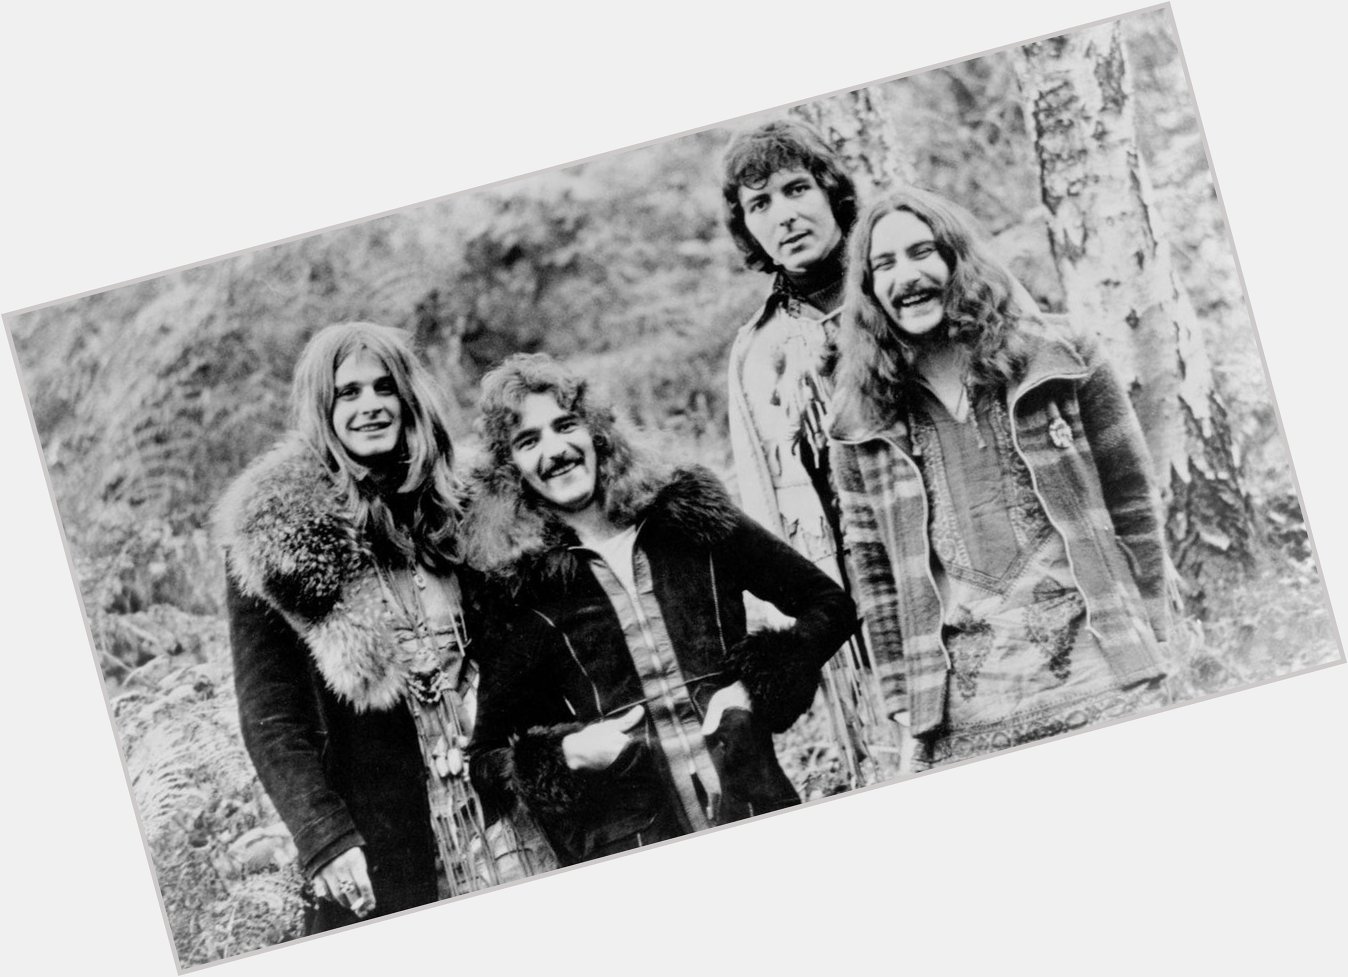 Happy birthday Geezer Butler of Black Sabbath! In 1971 we hung out with the \"dark princes of 